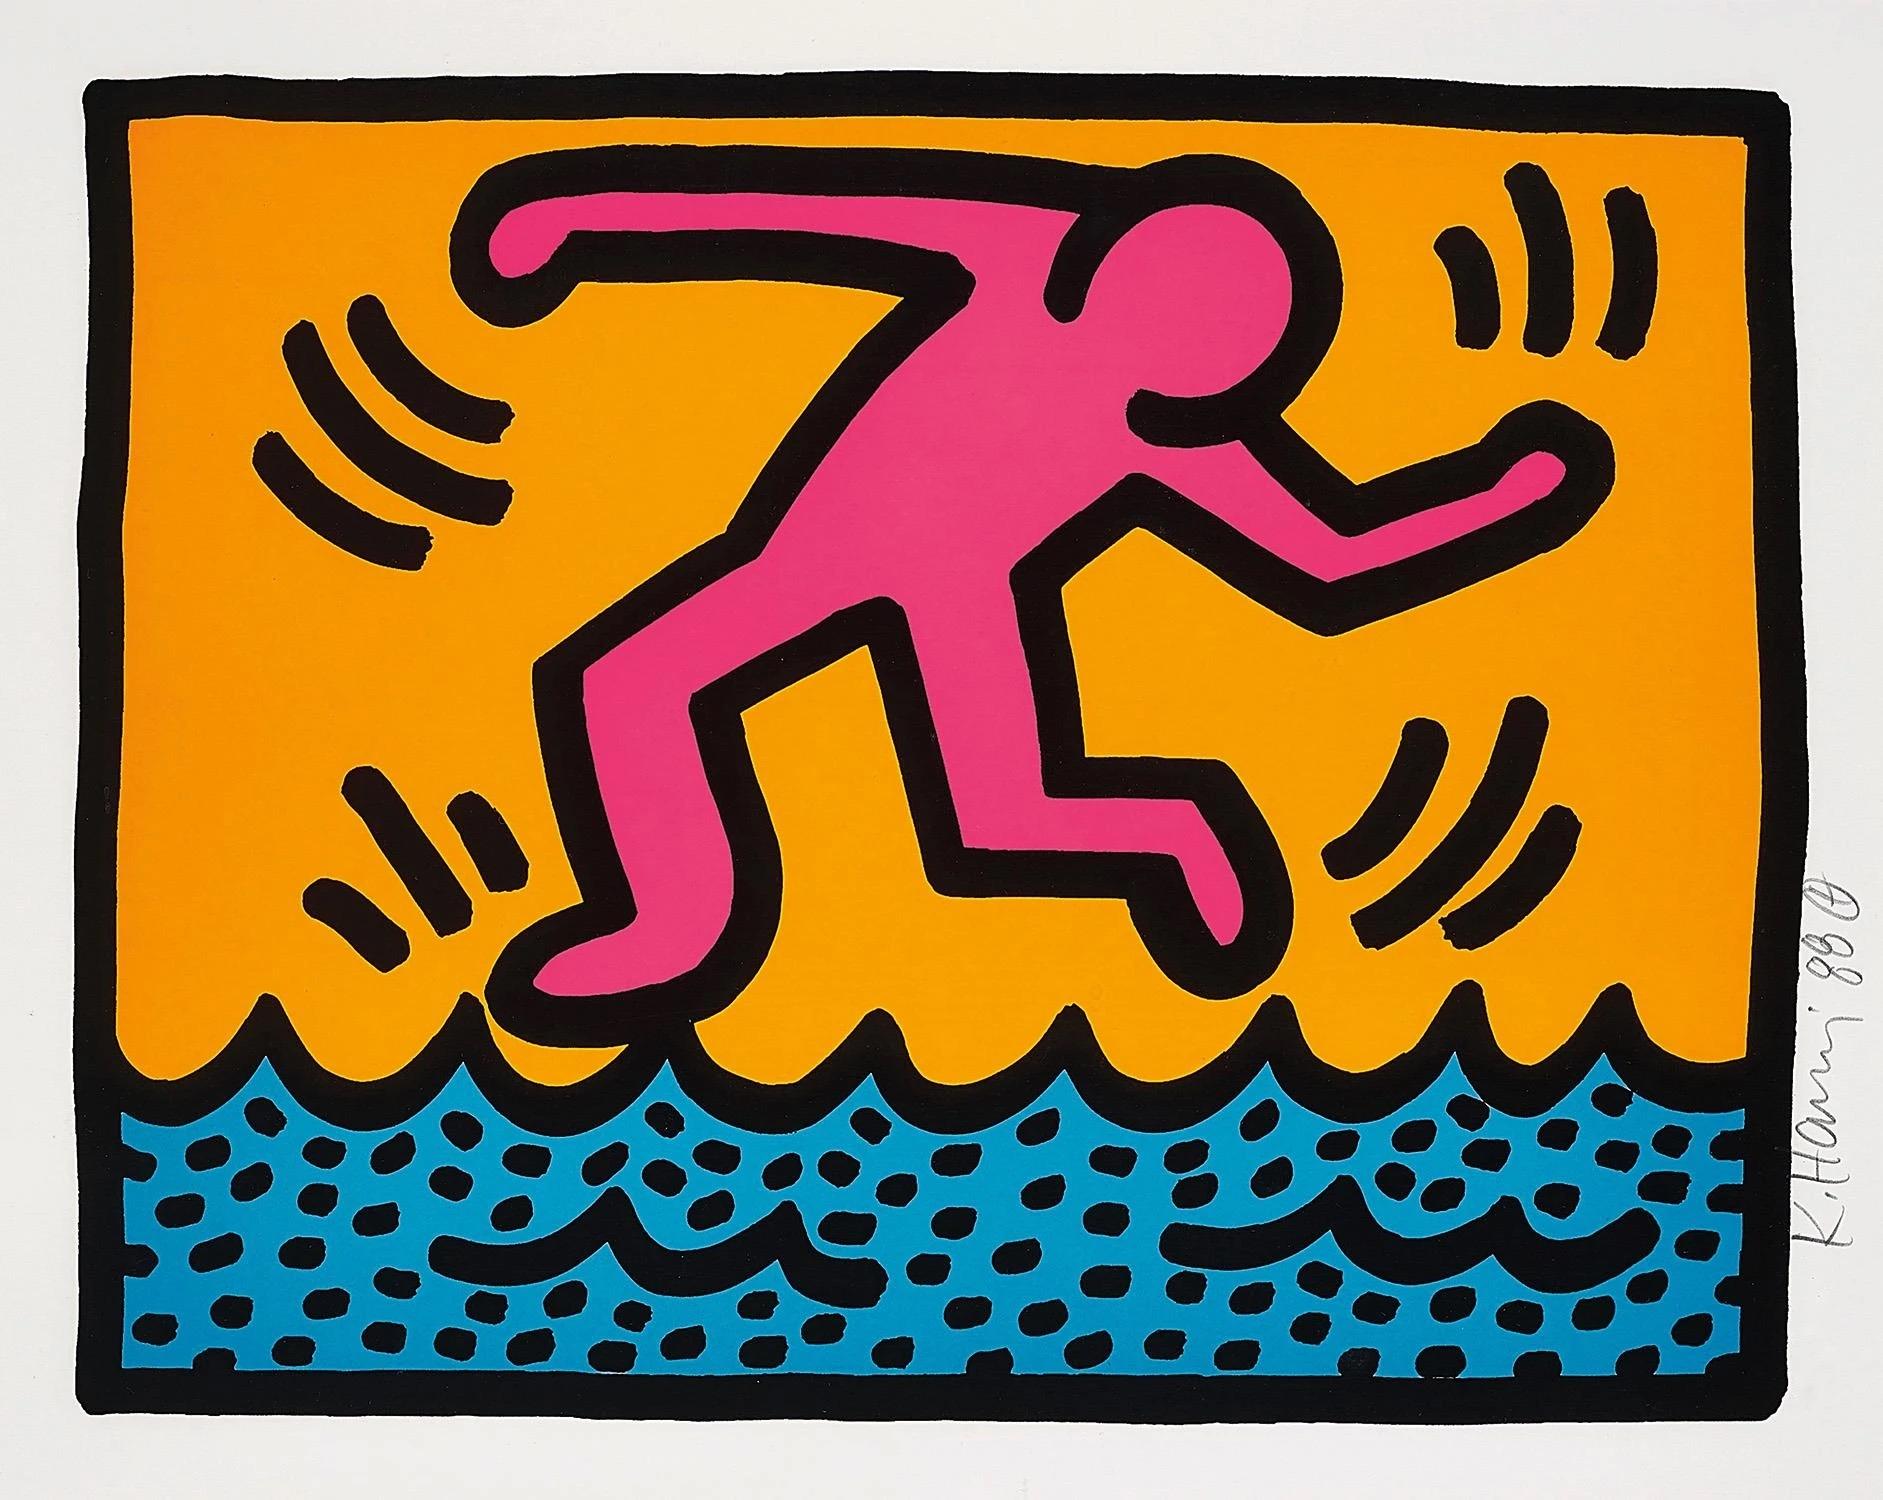 Keith Haring Abstract Print - Pop Shop II: one plate (L. pp. 96-97)